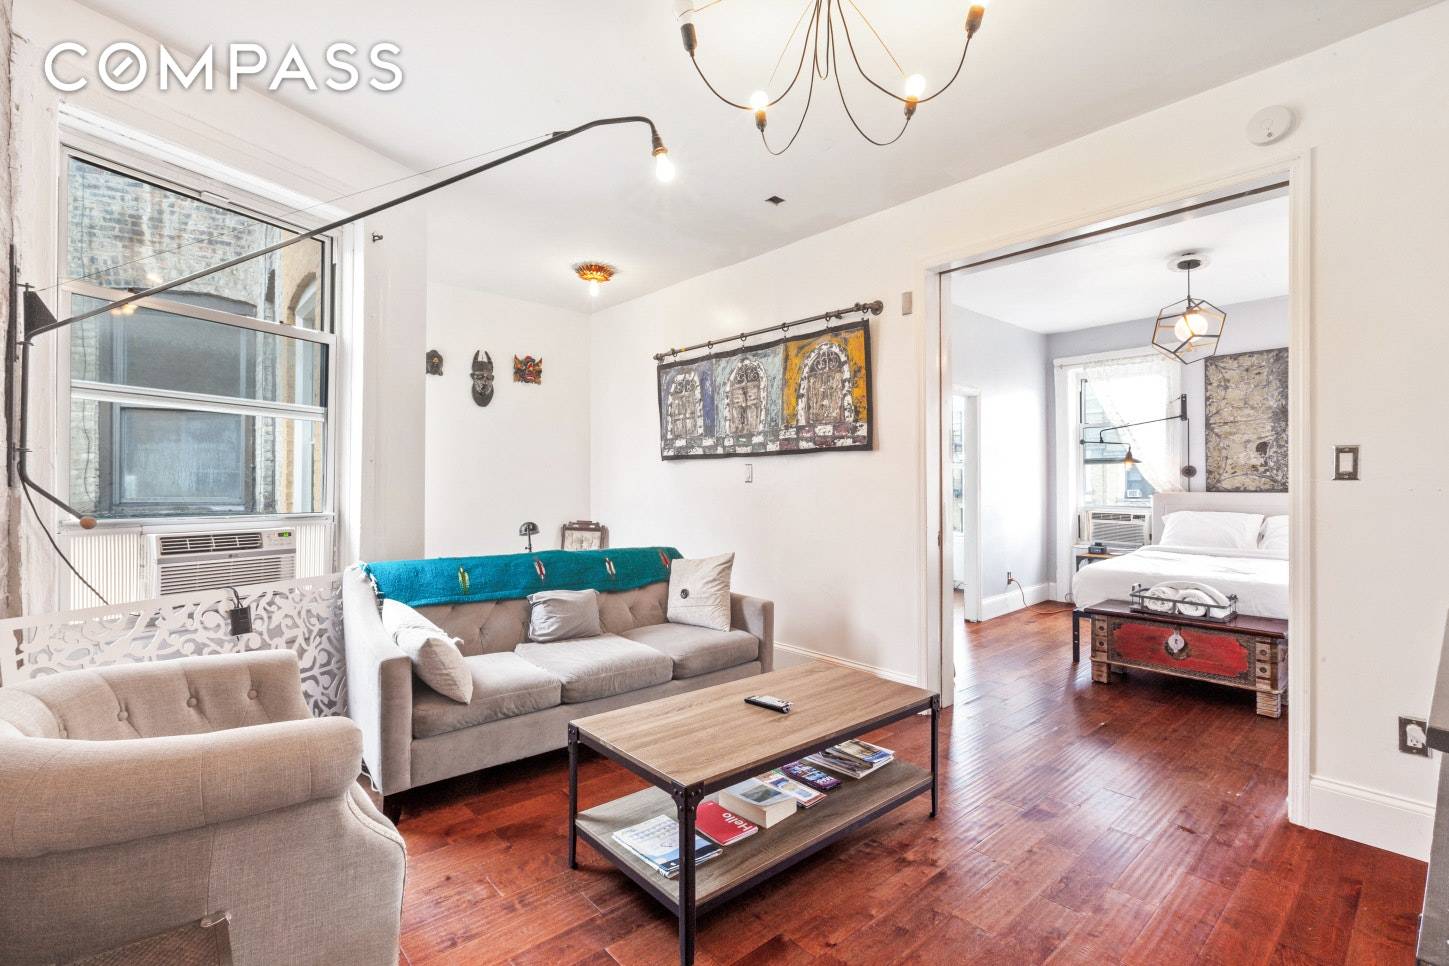 Bask in the sunlight of this renovated, south facing 2 bedroom apartment.